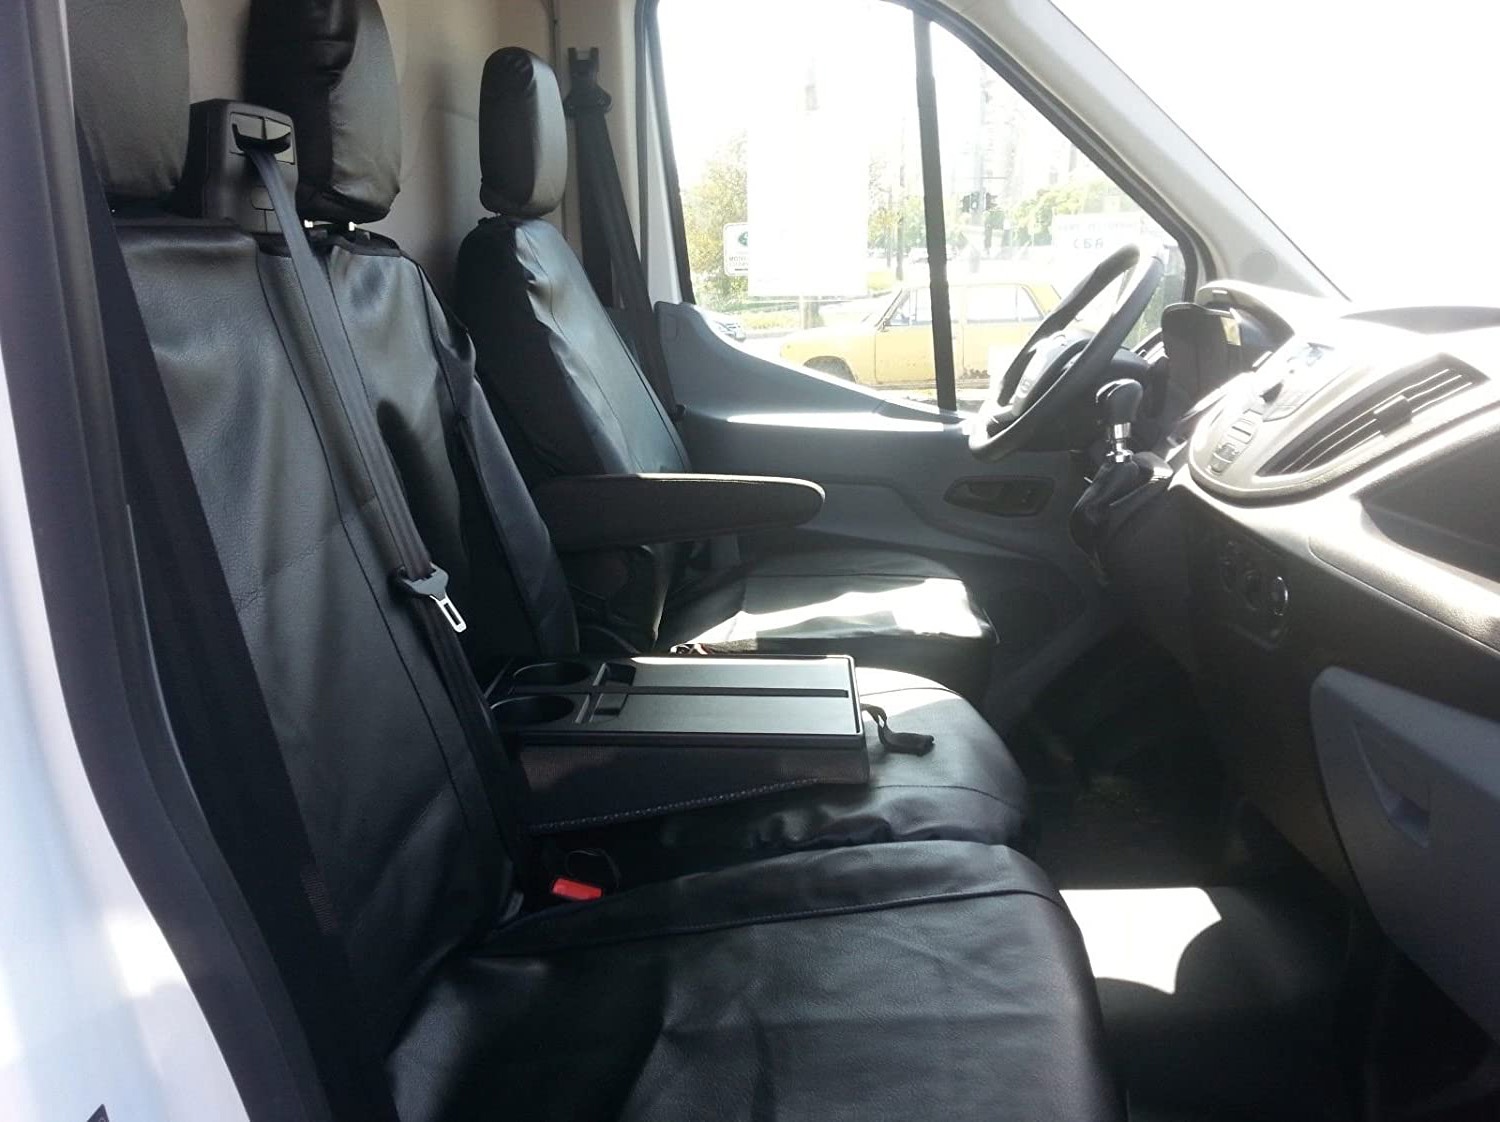 2+1 Seat covers for FORD TRANSIT 2013+ Van Bus Black Eco Leather Custom